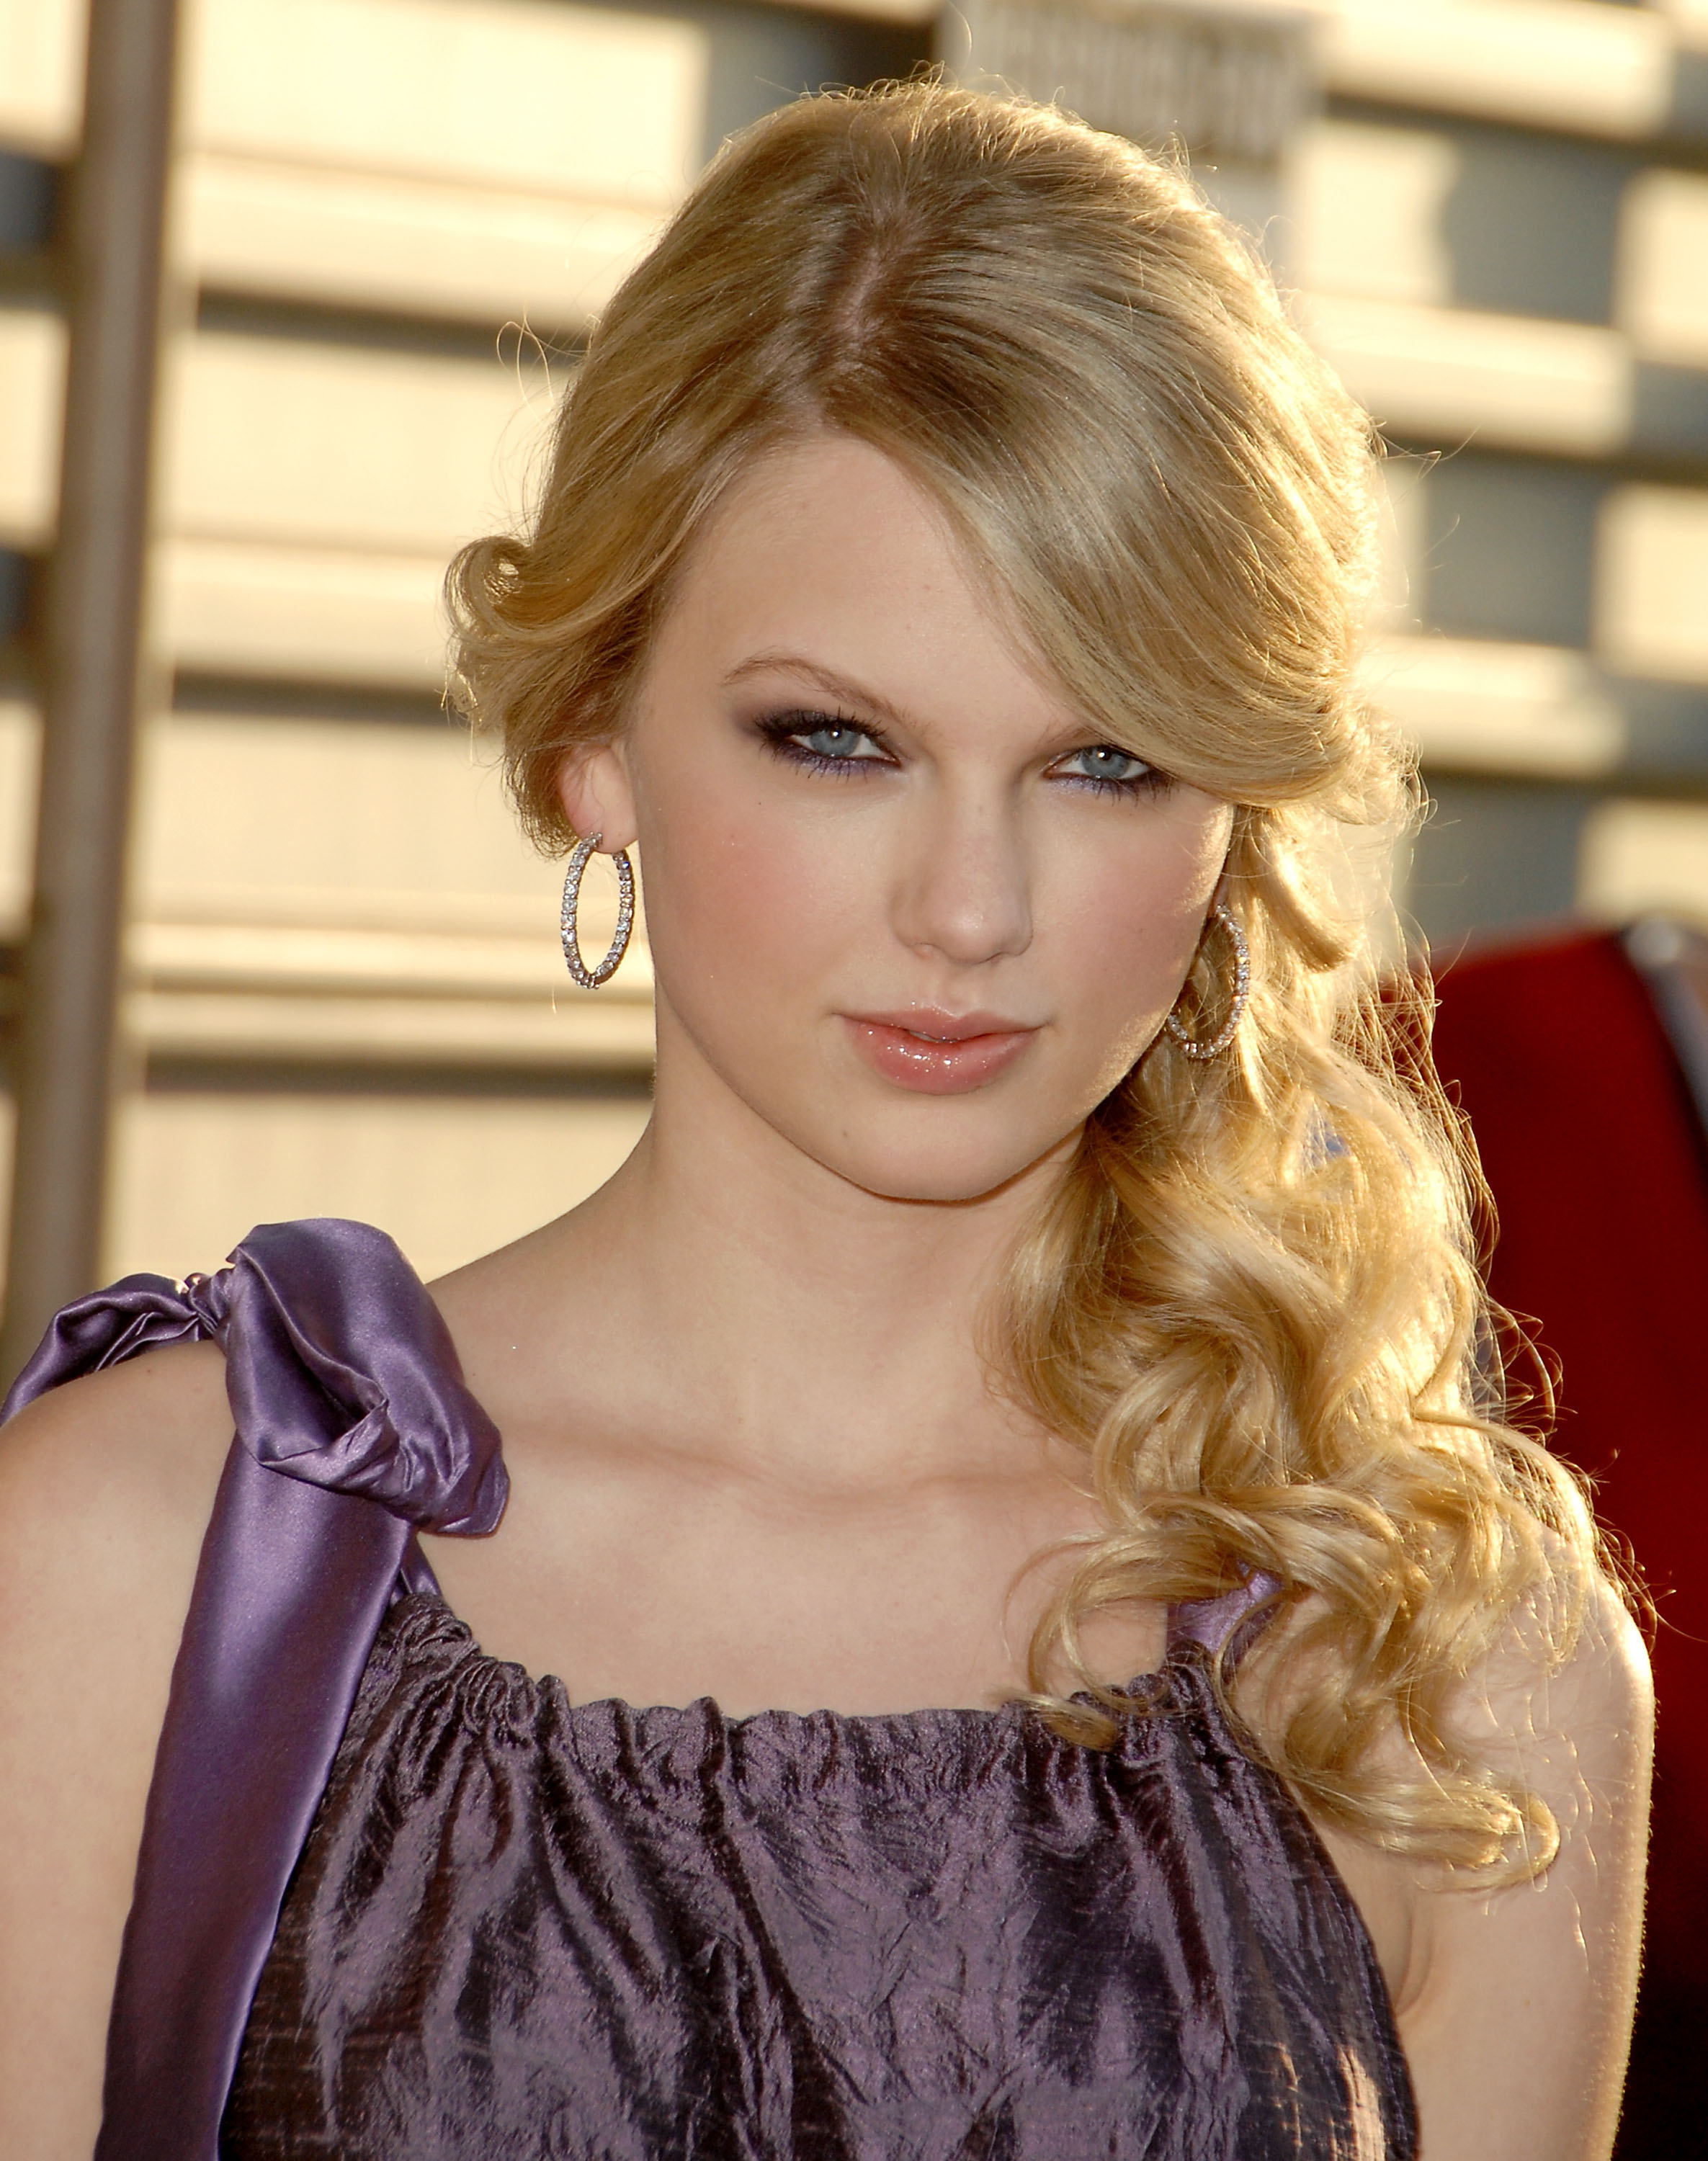 A close-up of Taylor Swift